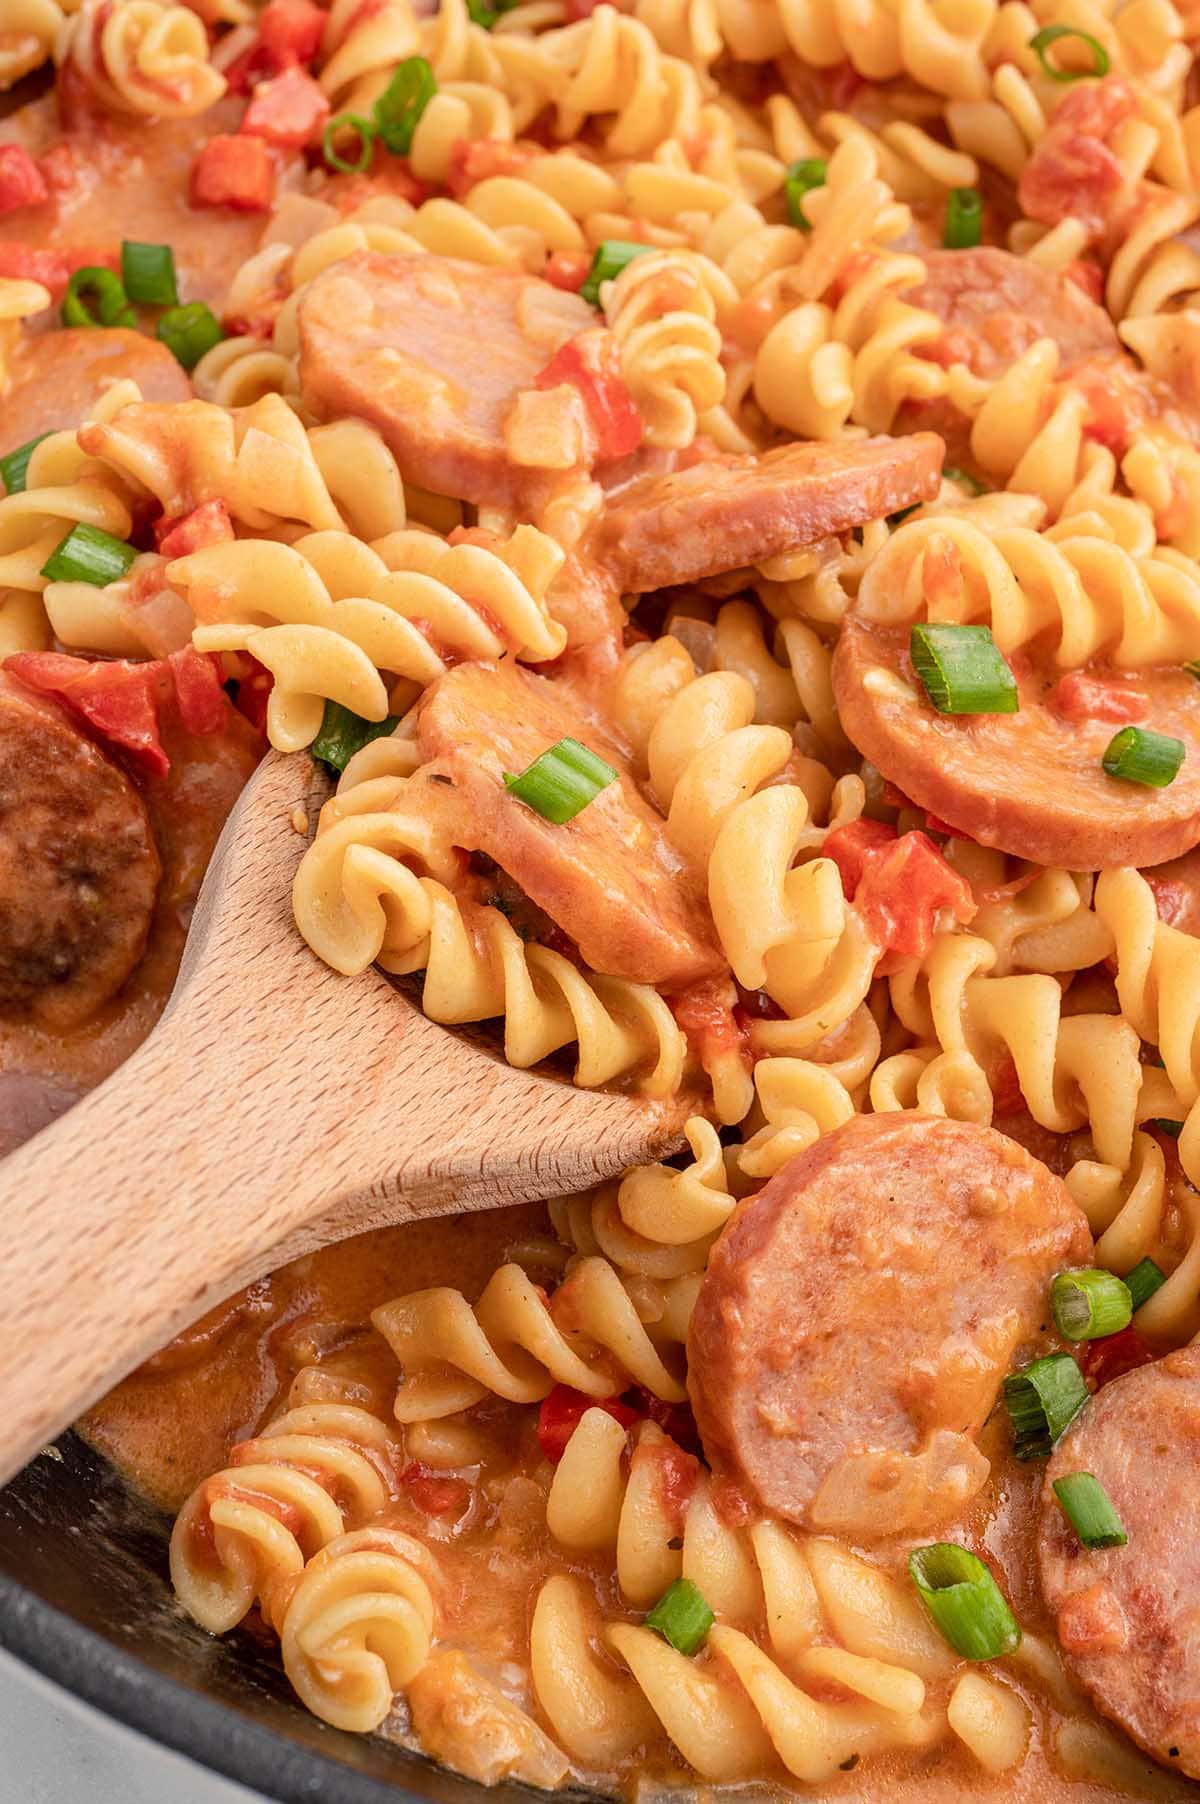 take a big scoop of Italian Sausage Pasta using a wooden spoon.